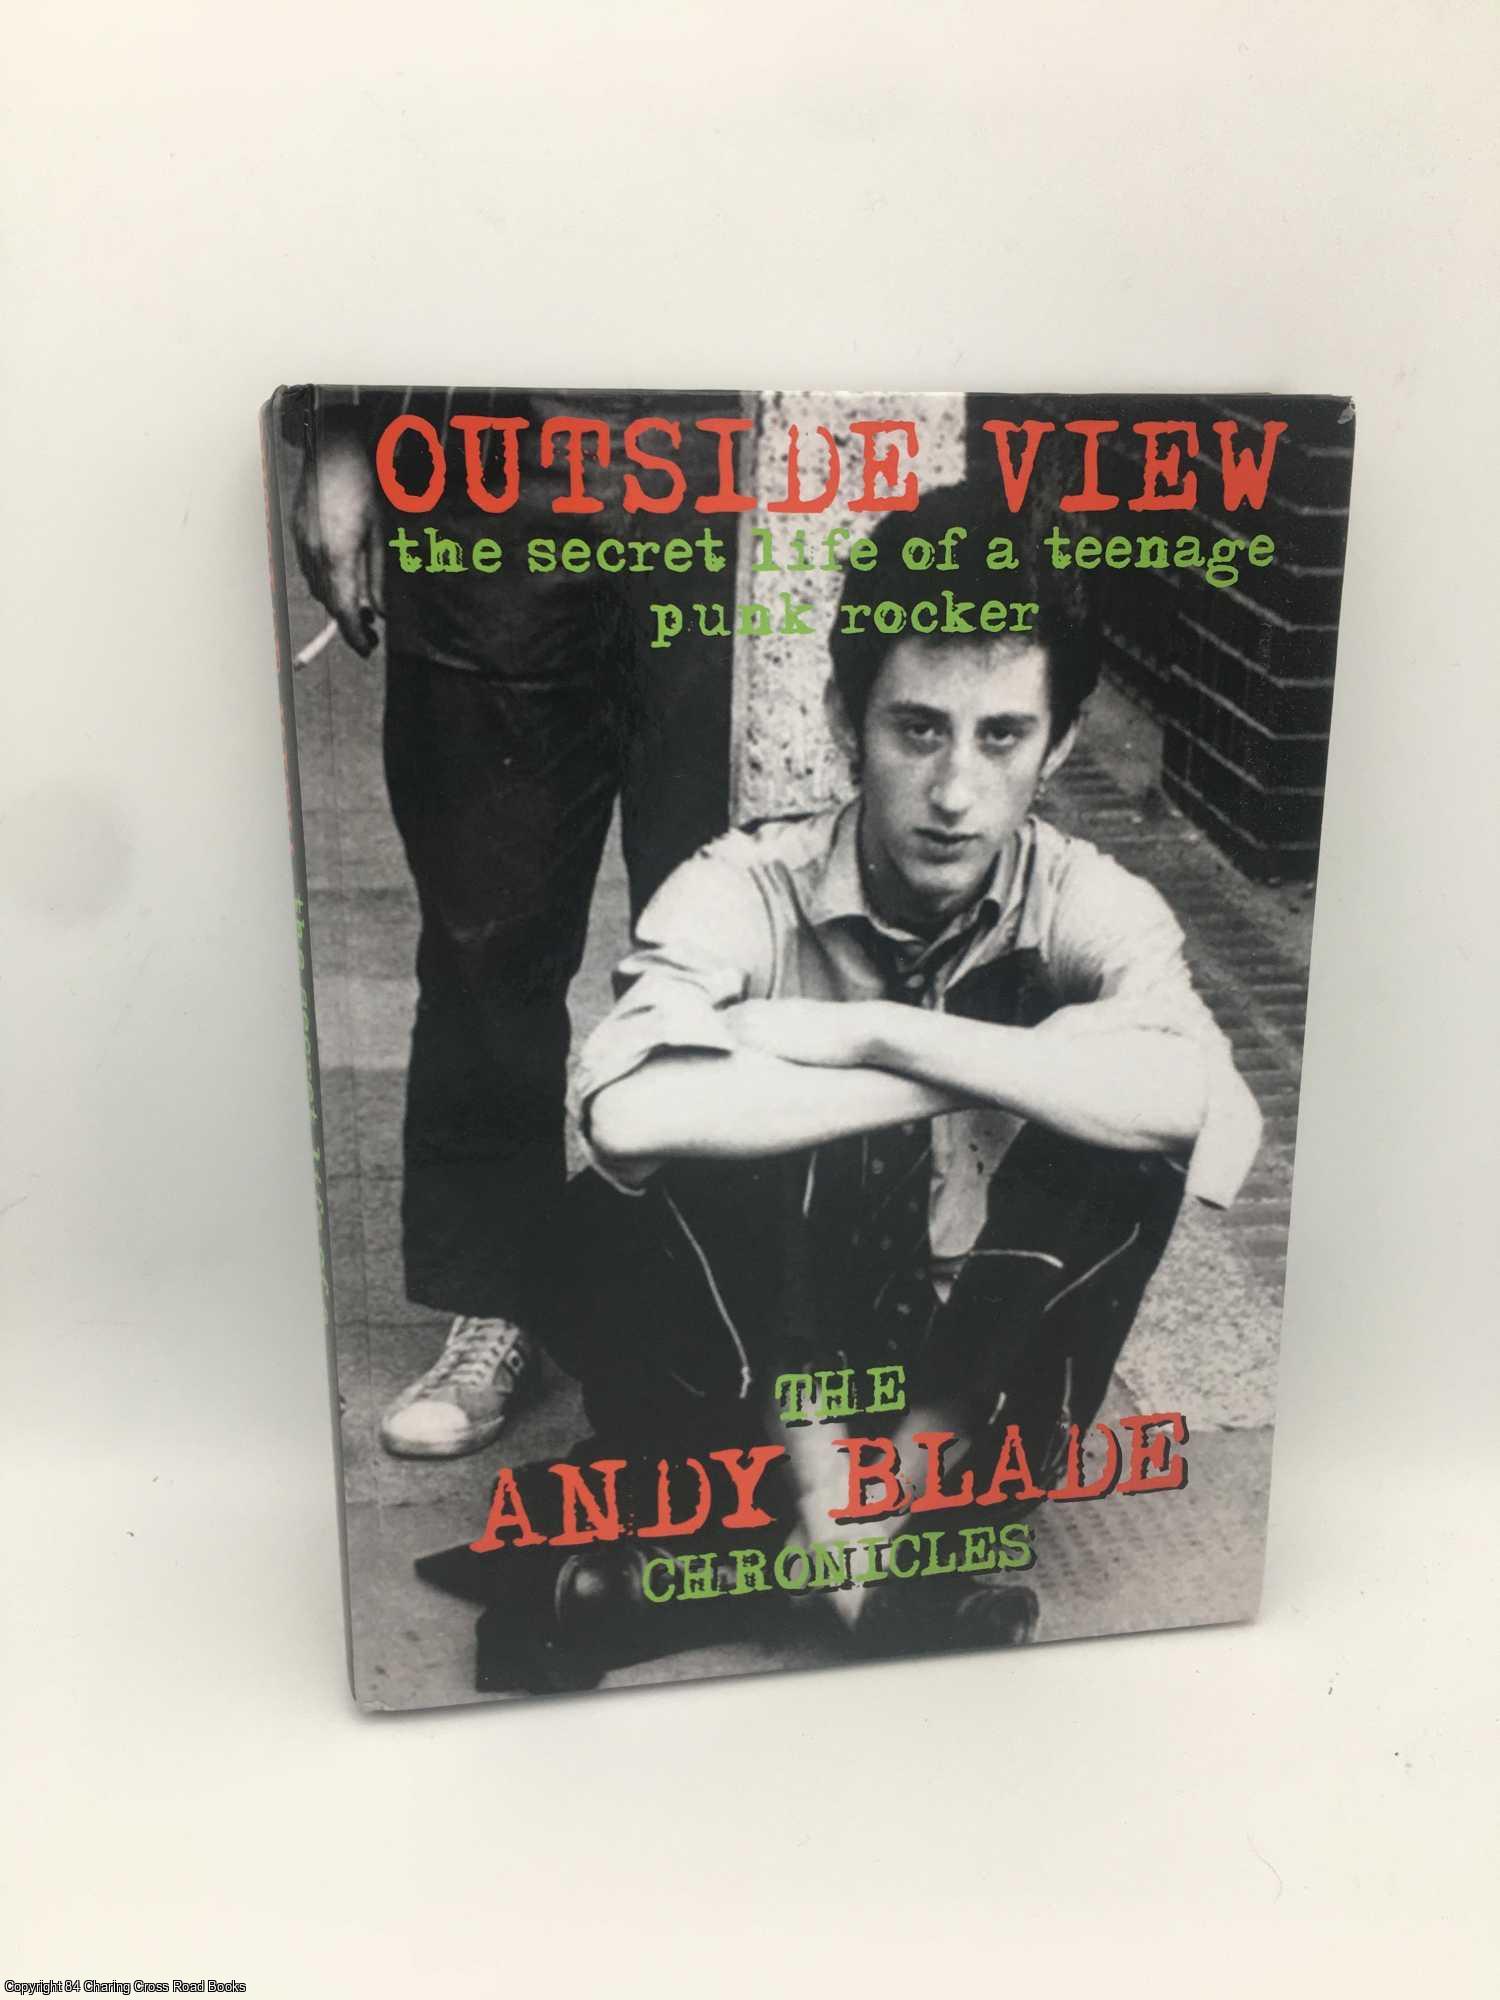 Blade, author Andy - Outside View: the Secret Life of a Teenage Punk Rocker: The Andy Blade Chronicles